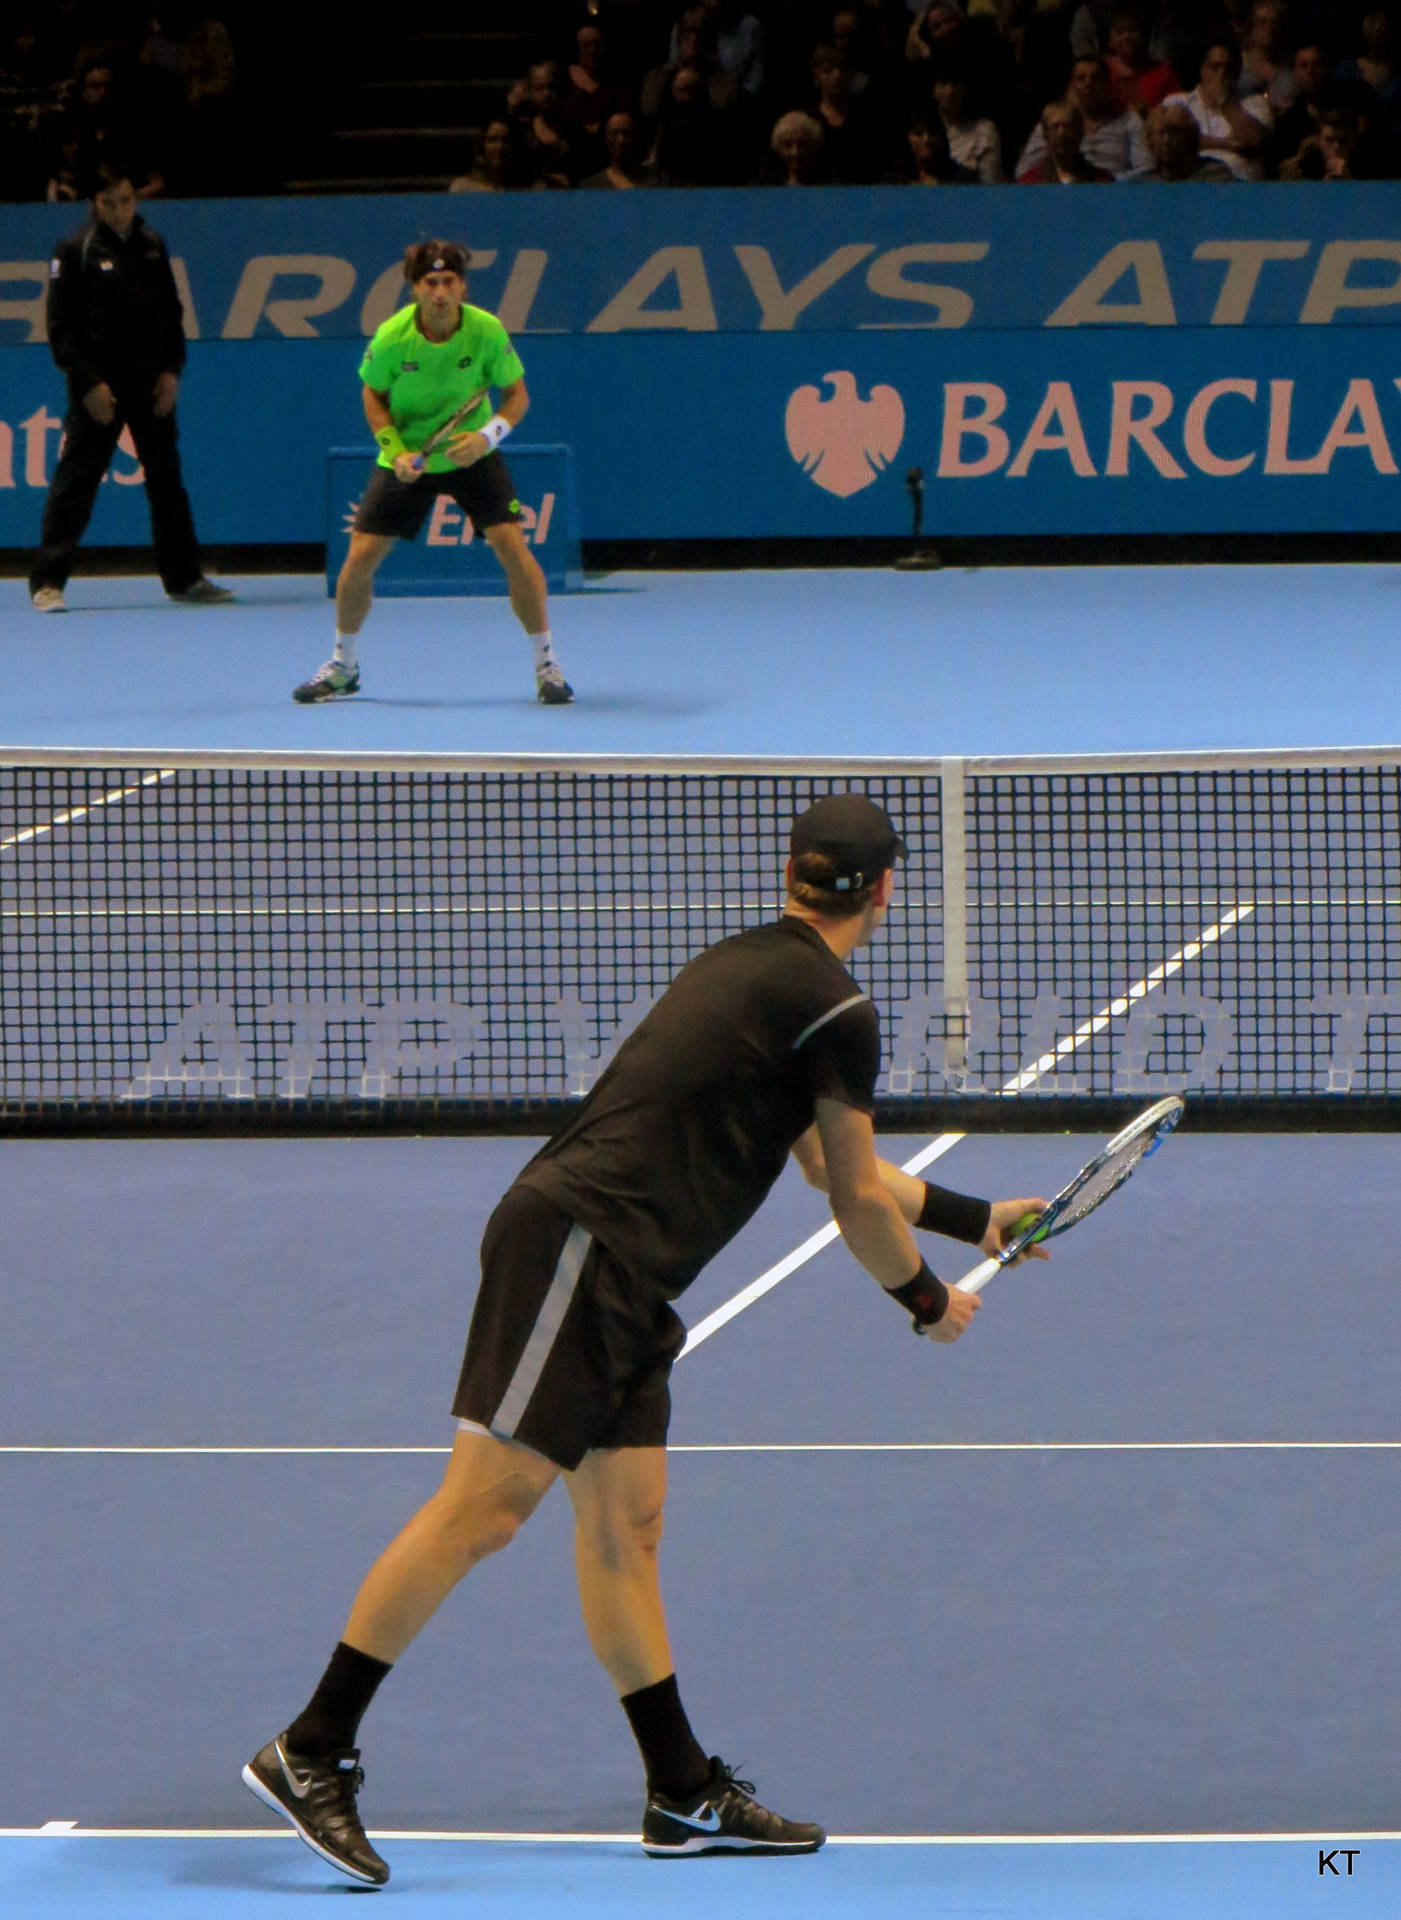 Professional Tennis Star, Tomas Berdych, in action on the court Wallpaper